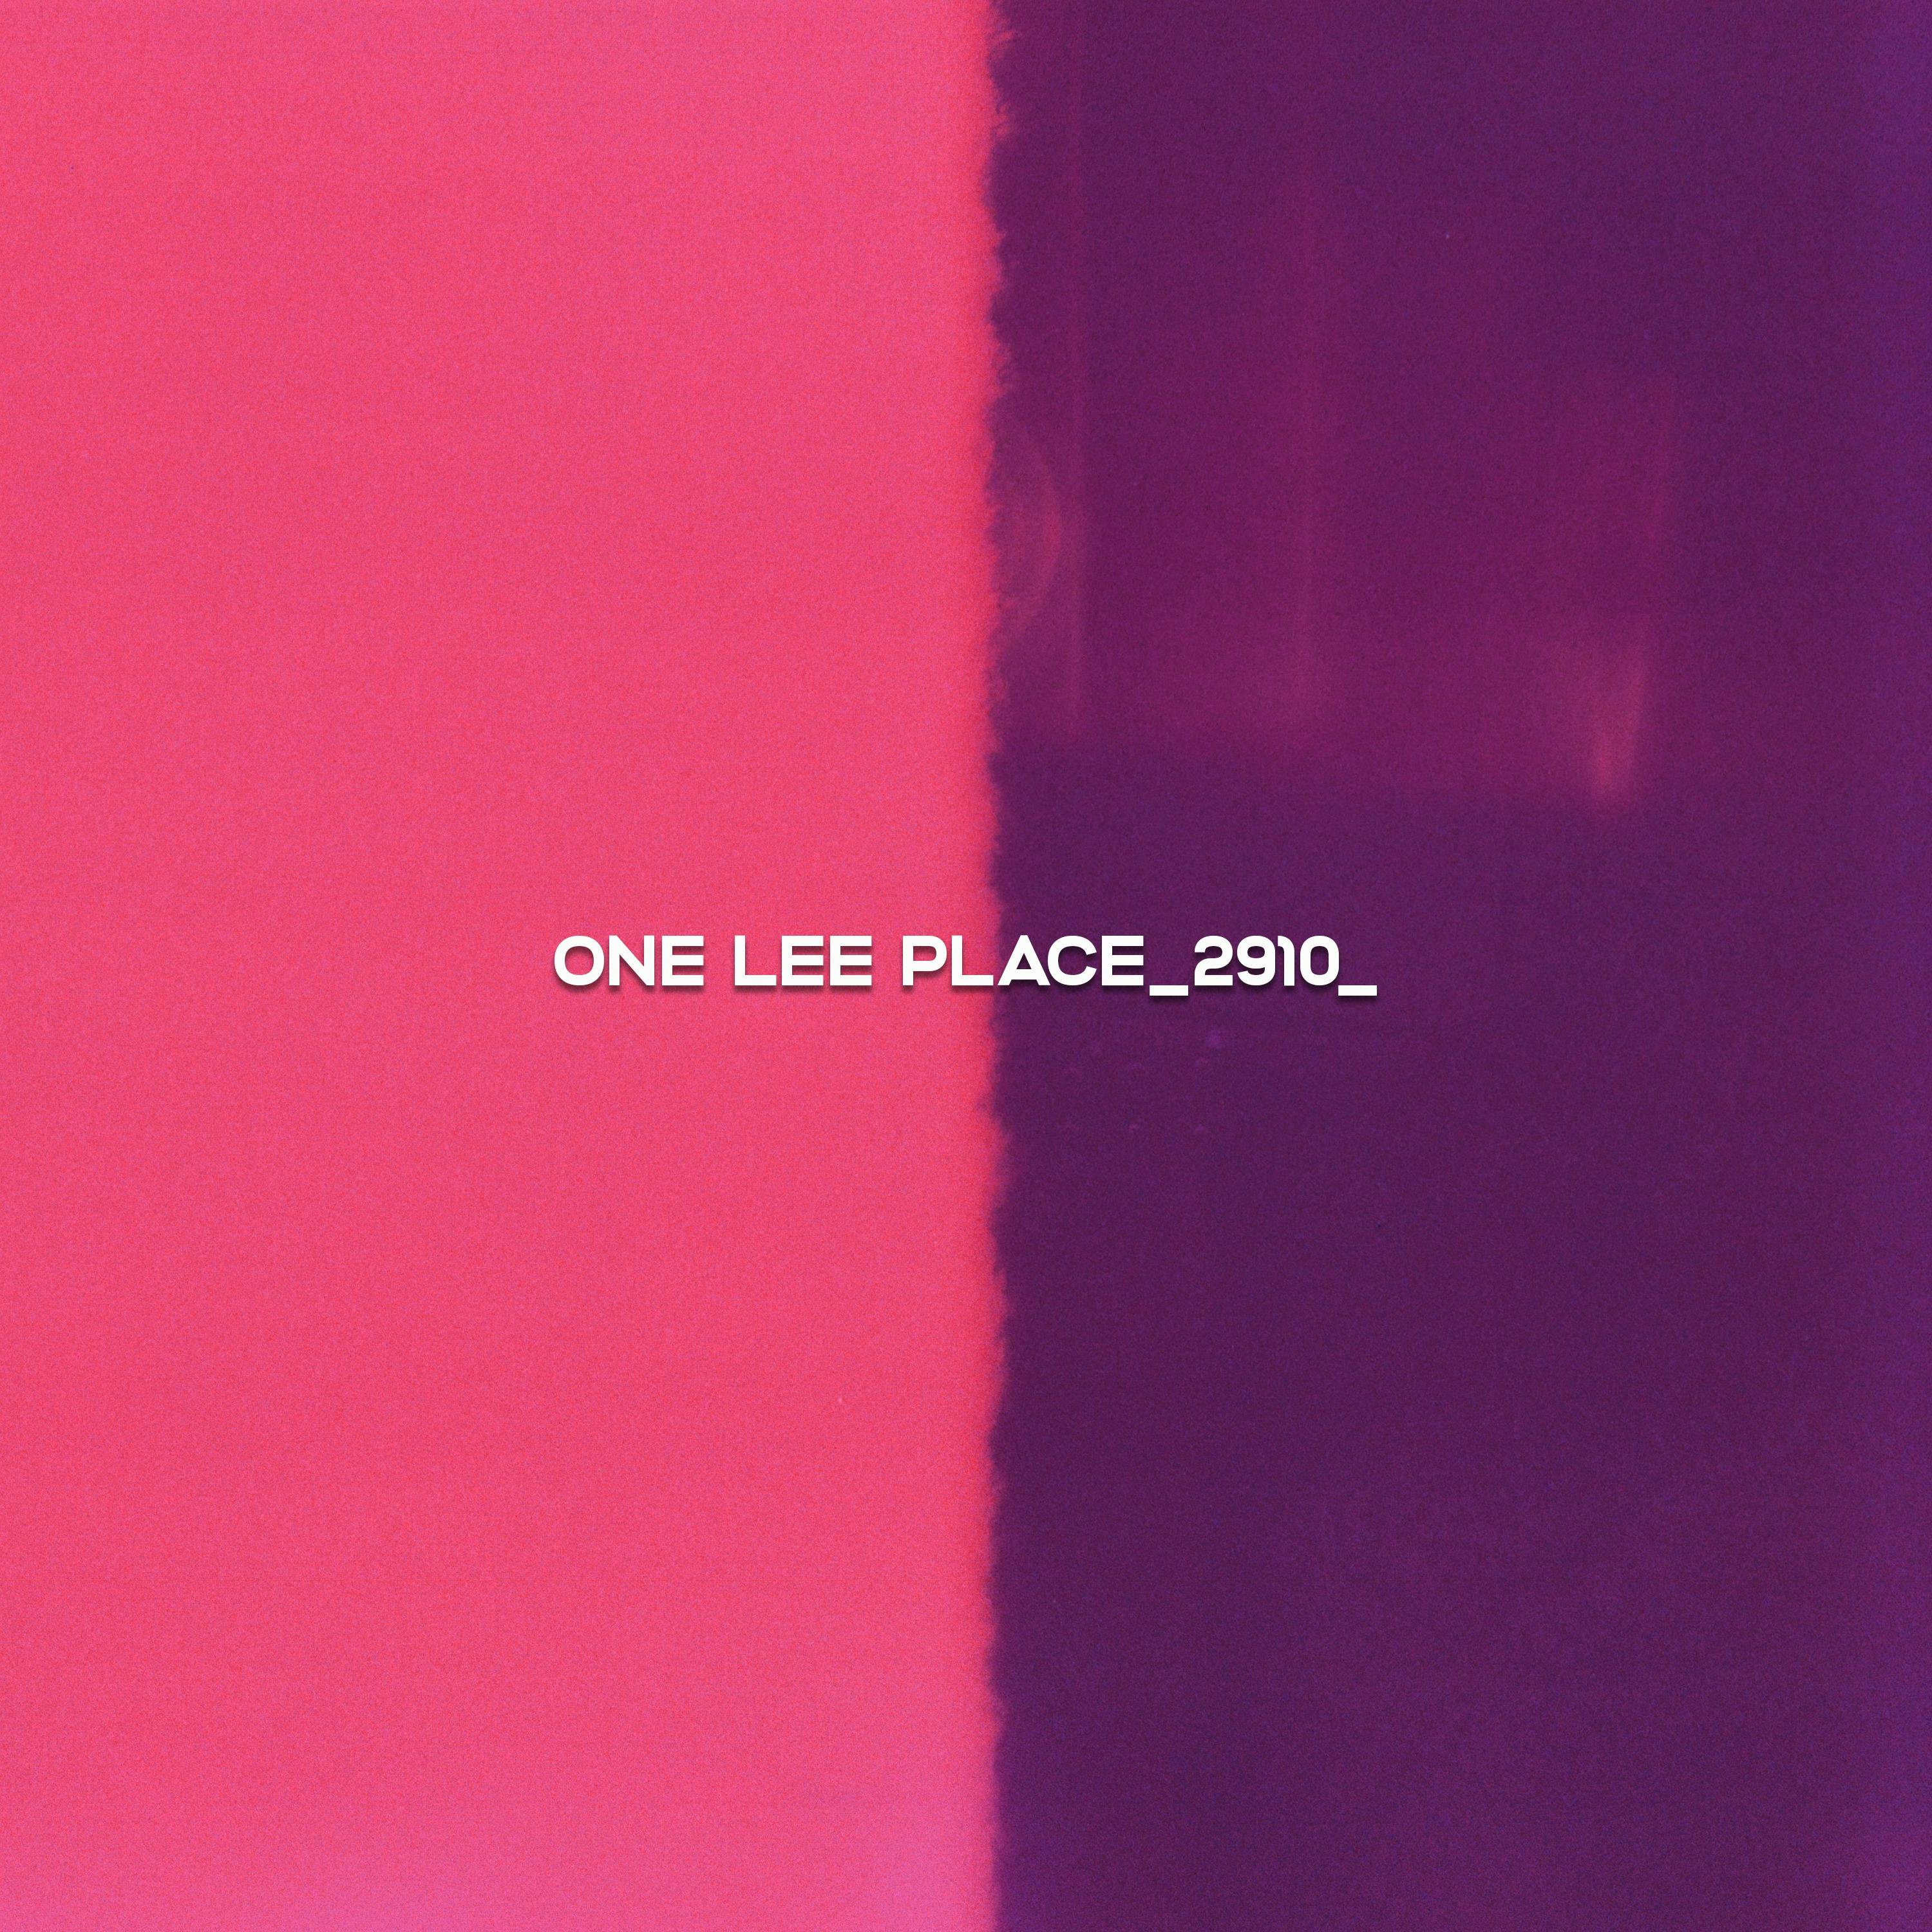 One Lee Place 2910 feat OMGKirbyDAO & Channel Tres